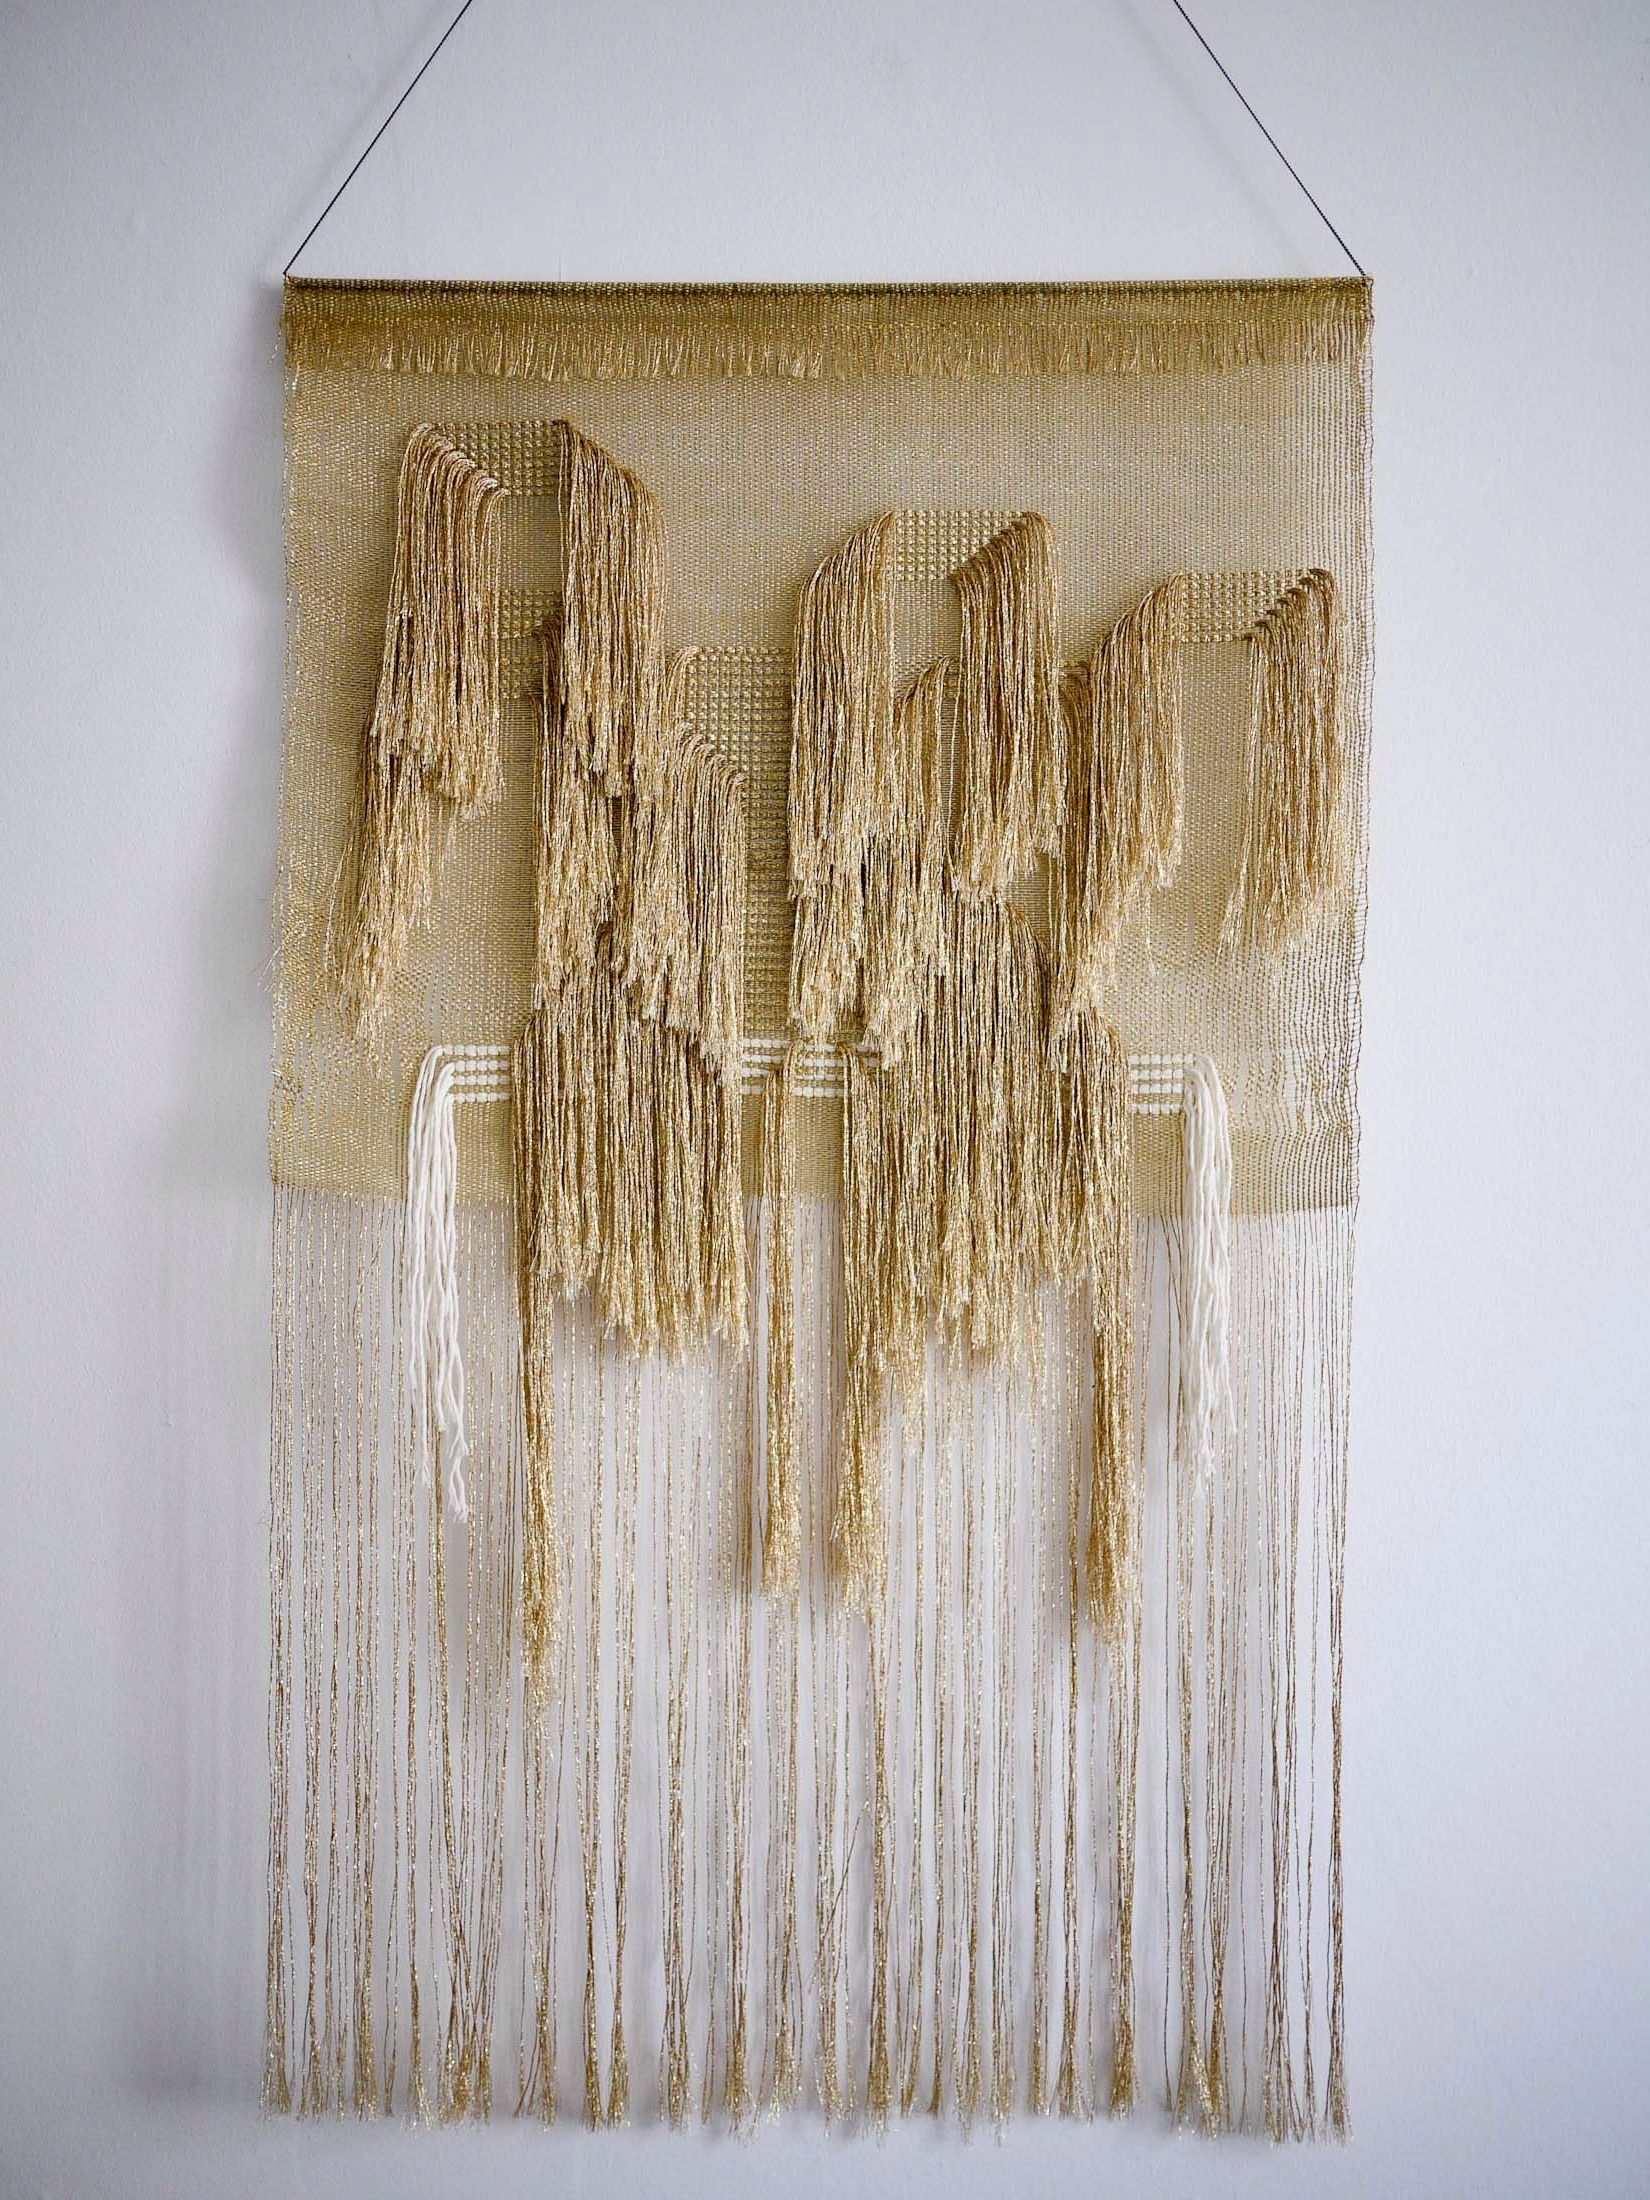 Woven Fabric Wall Art In Most Current Weaving Justine Ashbee For Native Line (View 1 of 15)